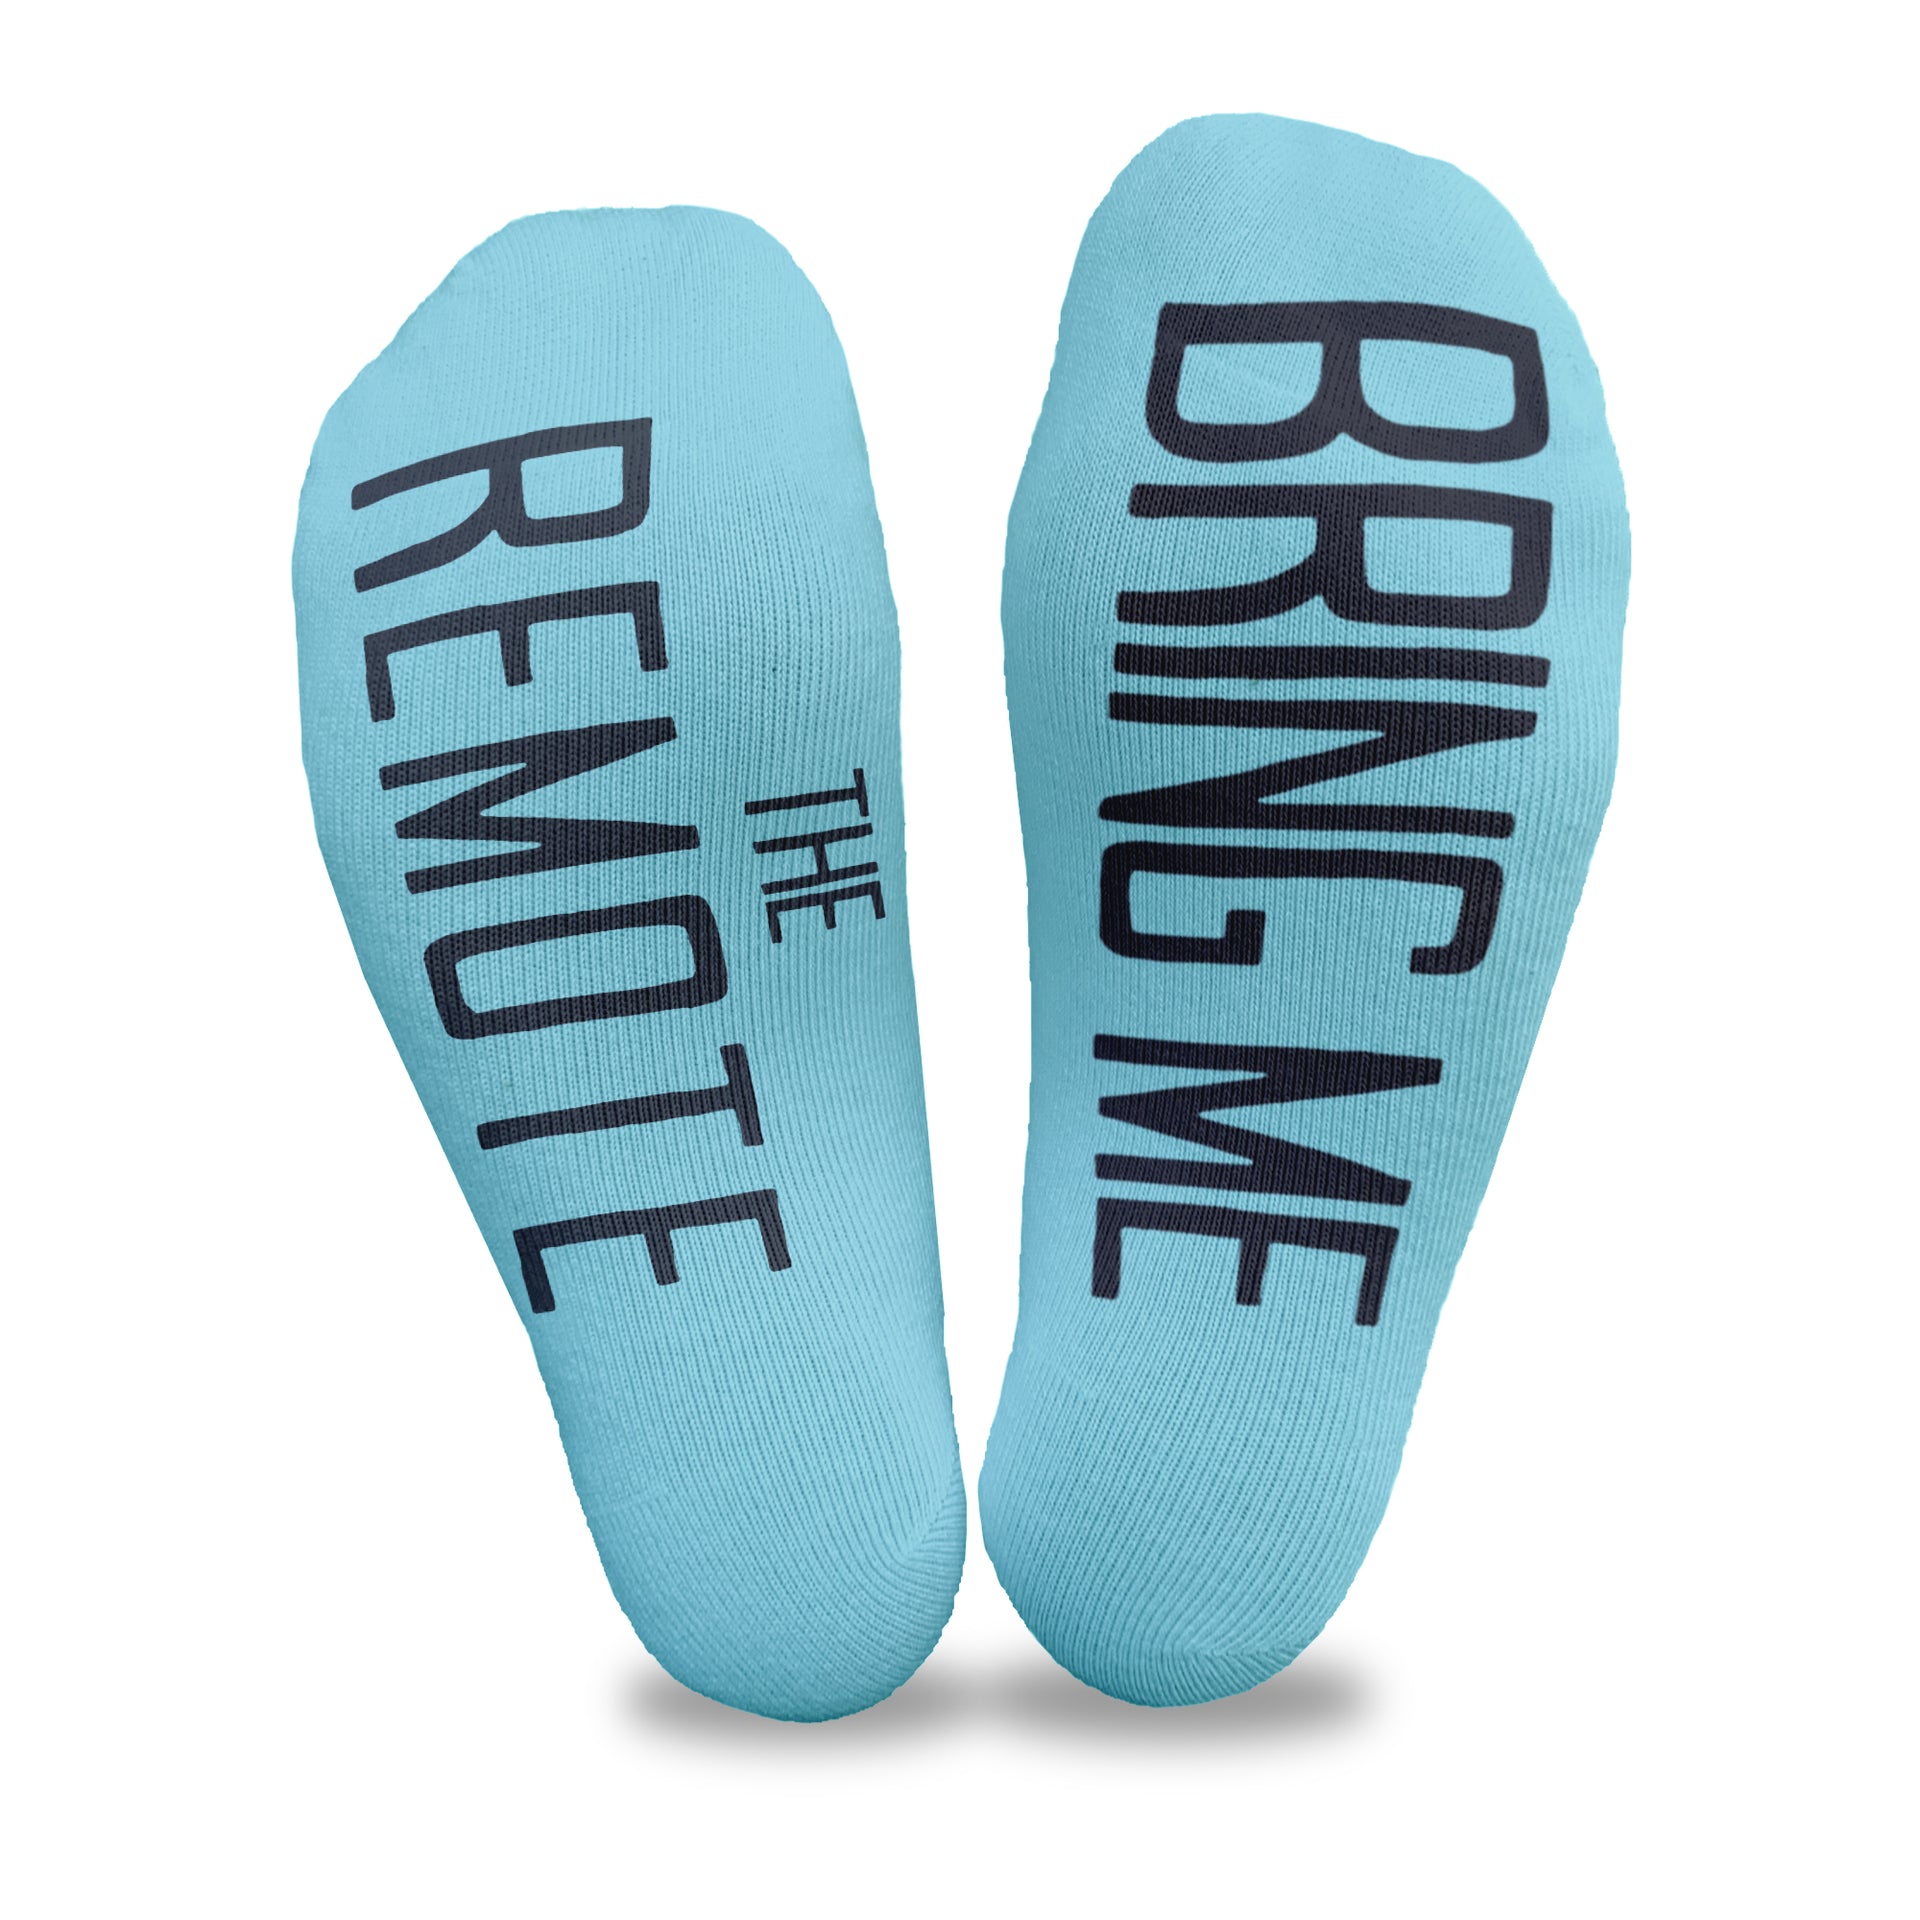 Bring me the remote custom printed on the bottom of turquoise cotton no show socks is a great way to get what you want!